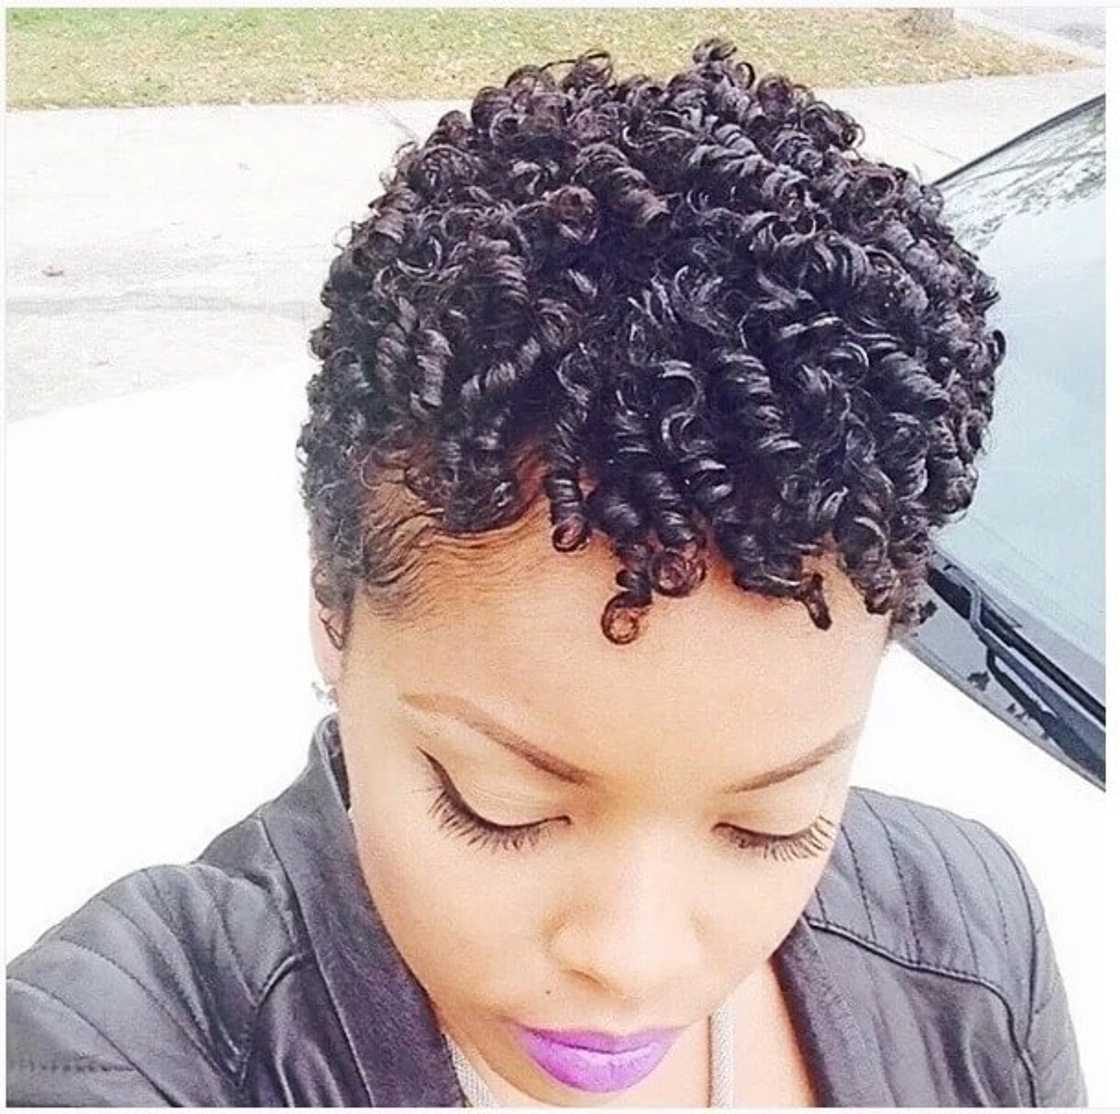 How to style short natural hair - With photos and video